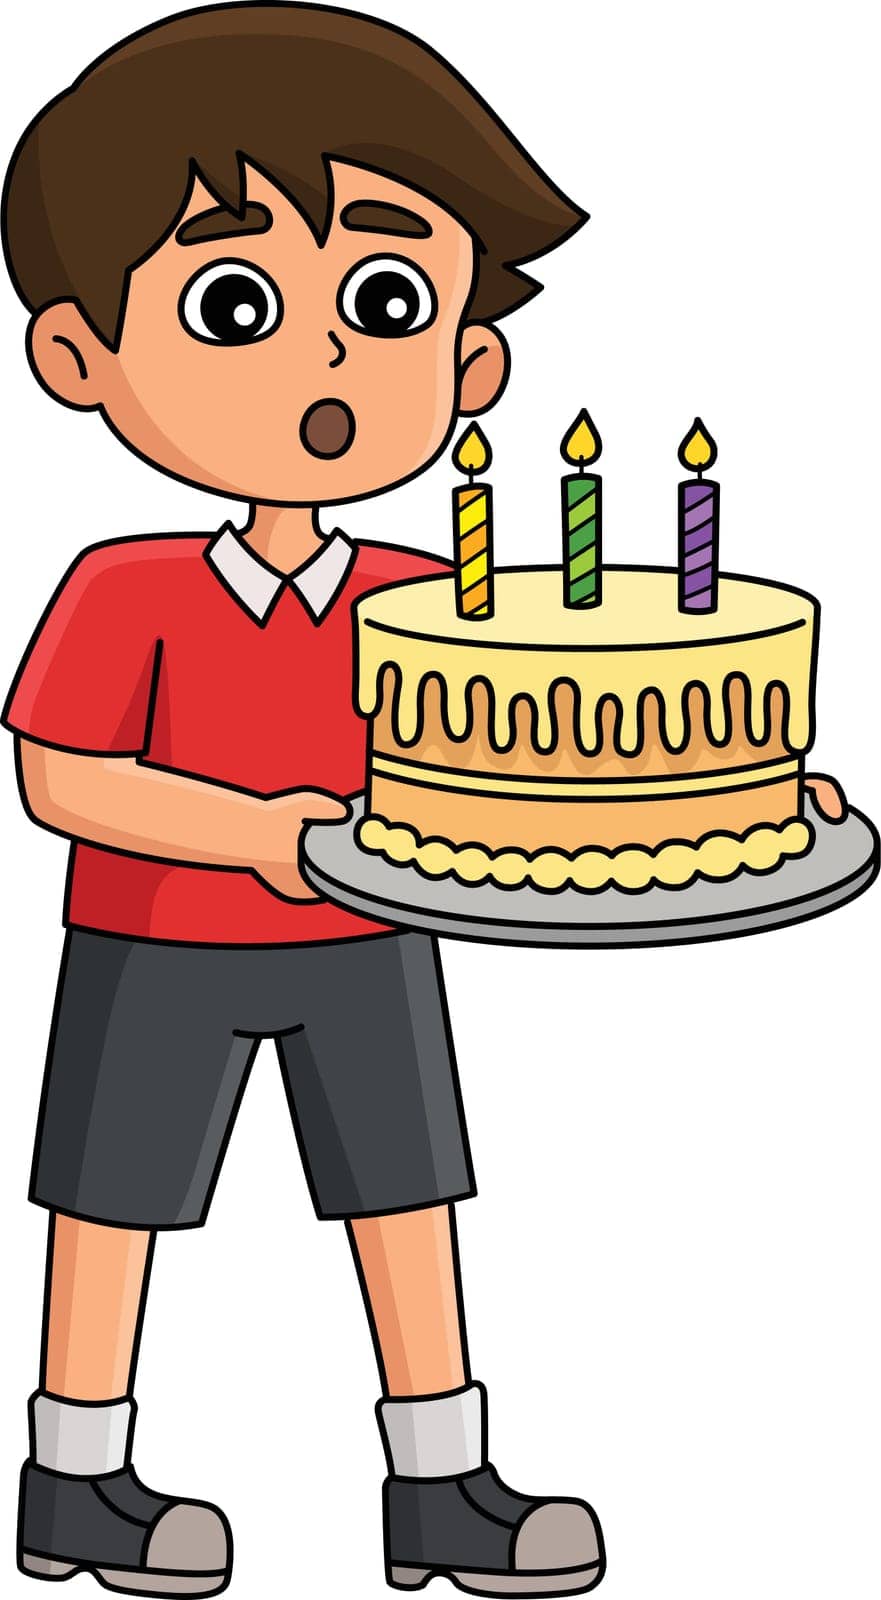 This cartoon clipart shows a Boy Blowing a Happy Birthday Cake illustration.